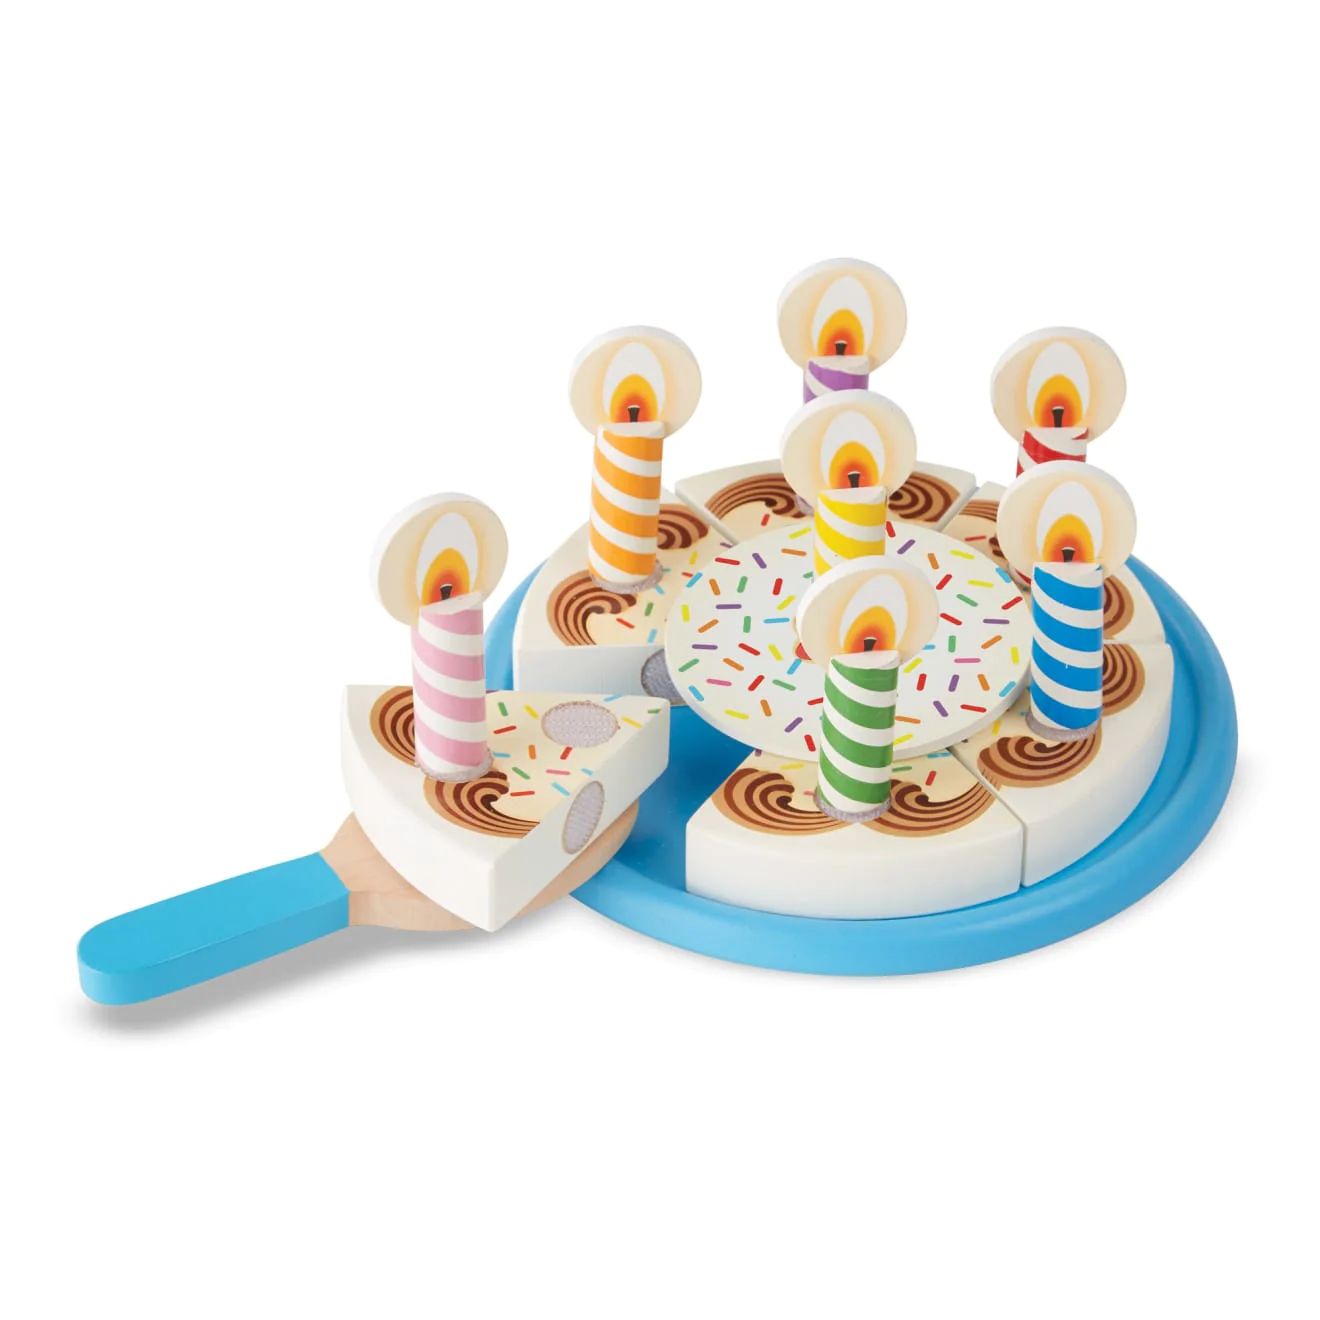 Birthday Party - Wooden Play Food | Melissa and Doug